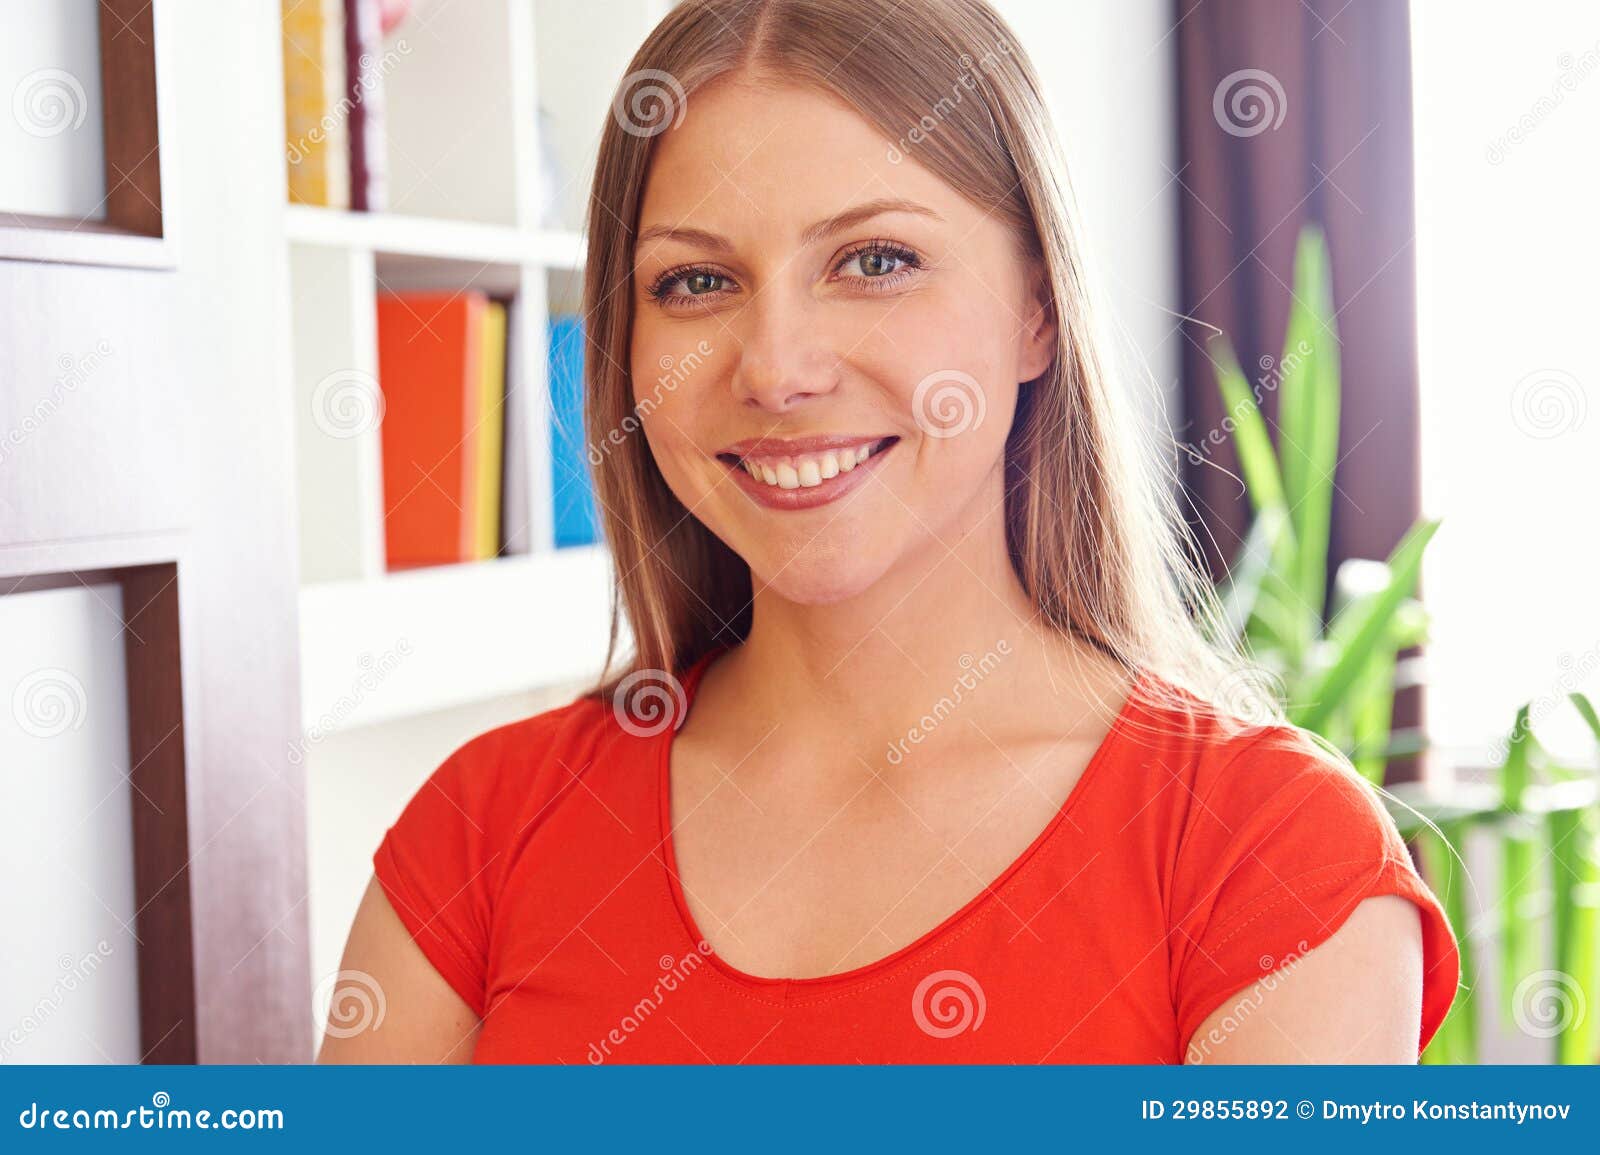 glad young woman at home